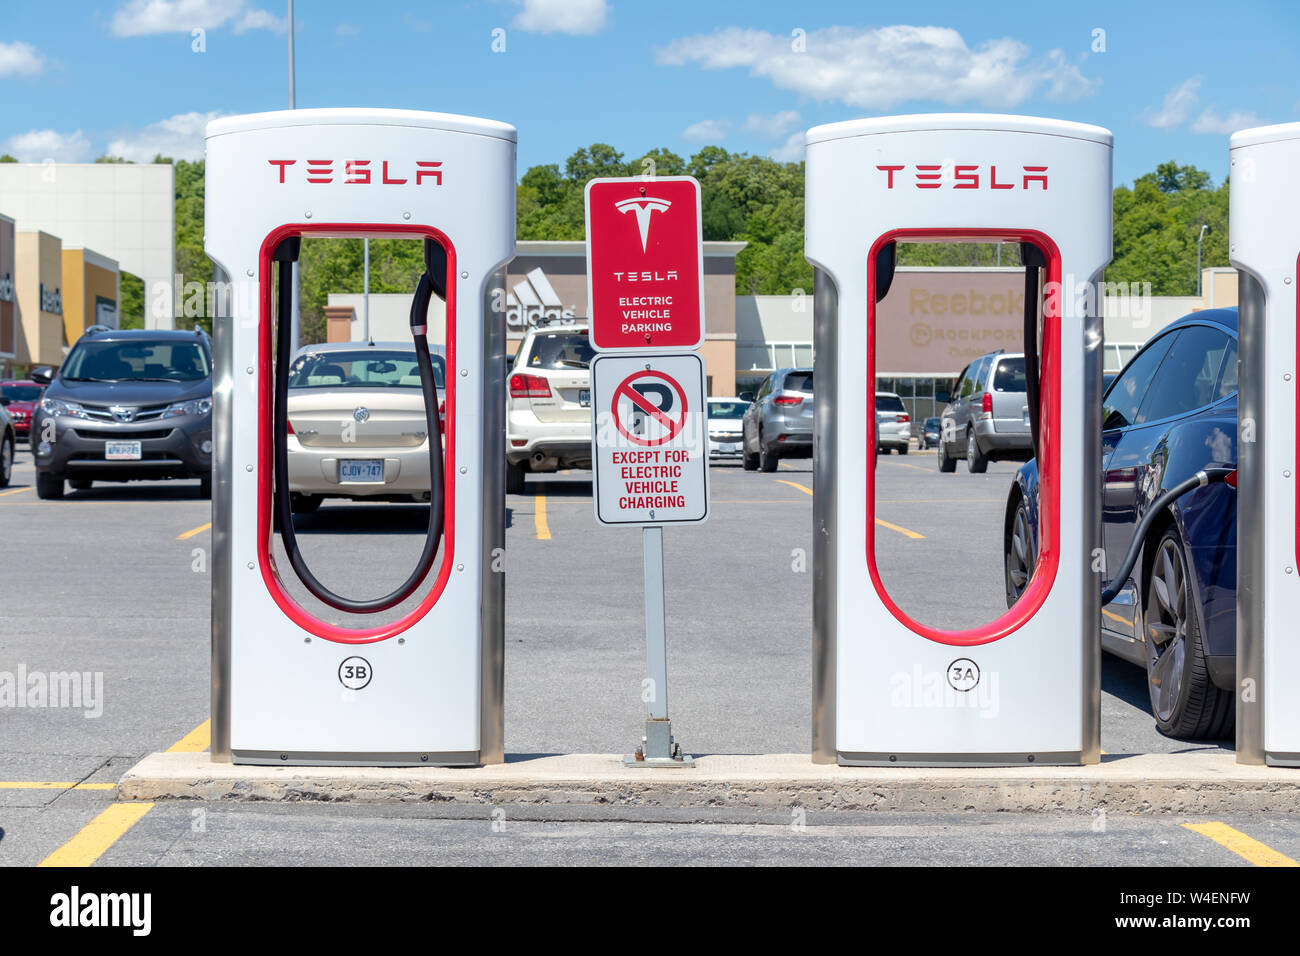 Tesla Supercharger Stalls in Kingston, Ontario with parking restriction signs and blue Tesla Model S charging in the background. Stock Photo